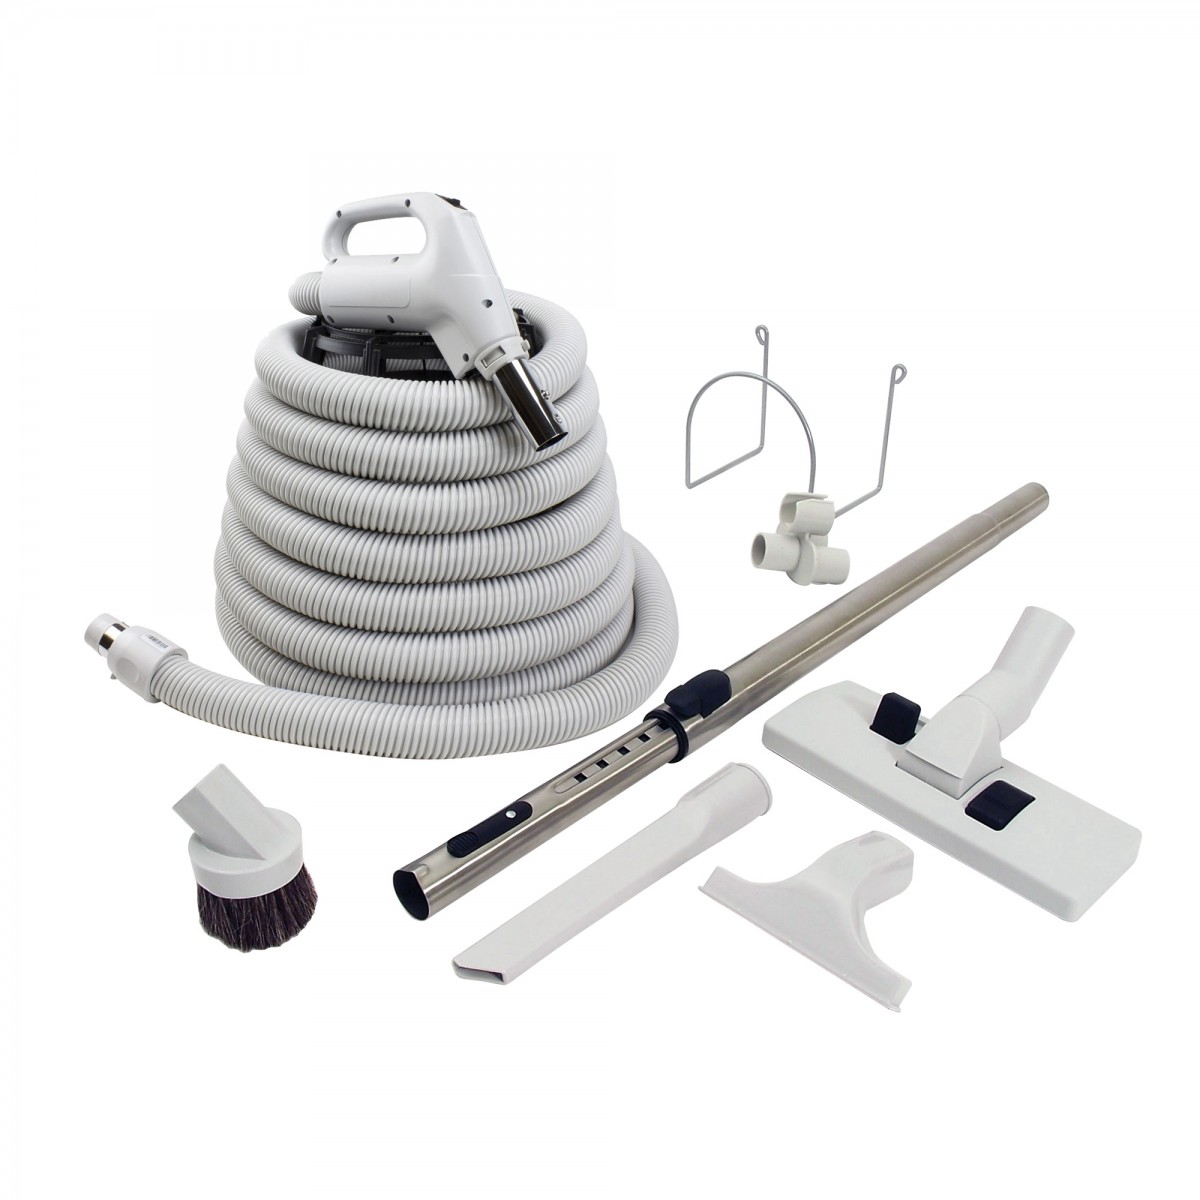 central vacuum attachment kit for wood floors